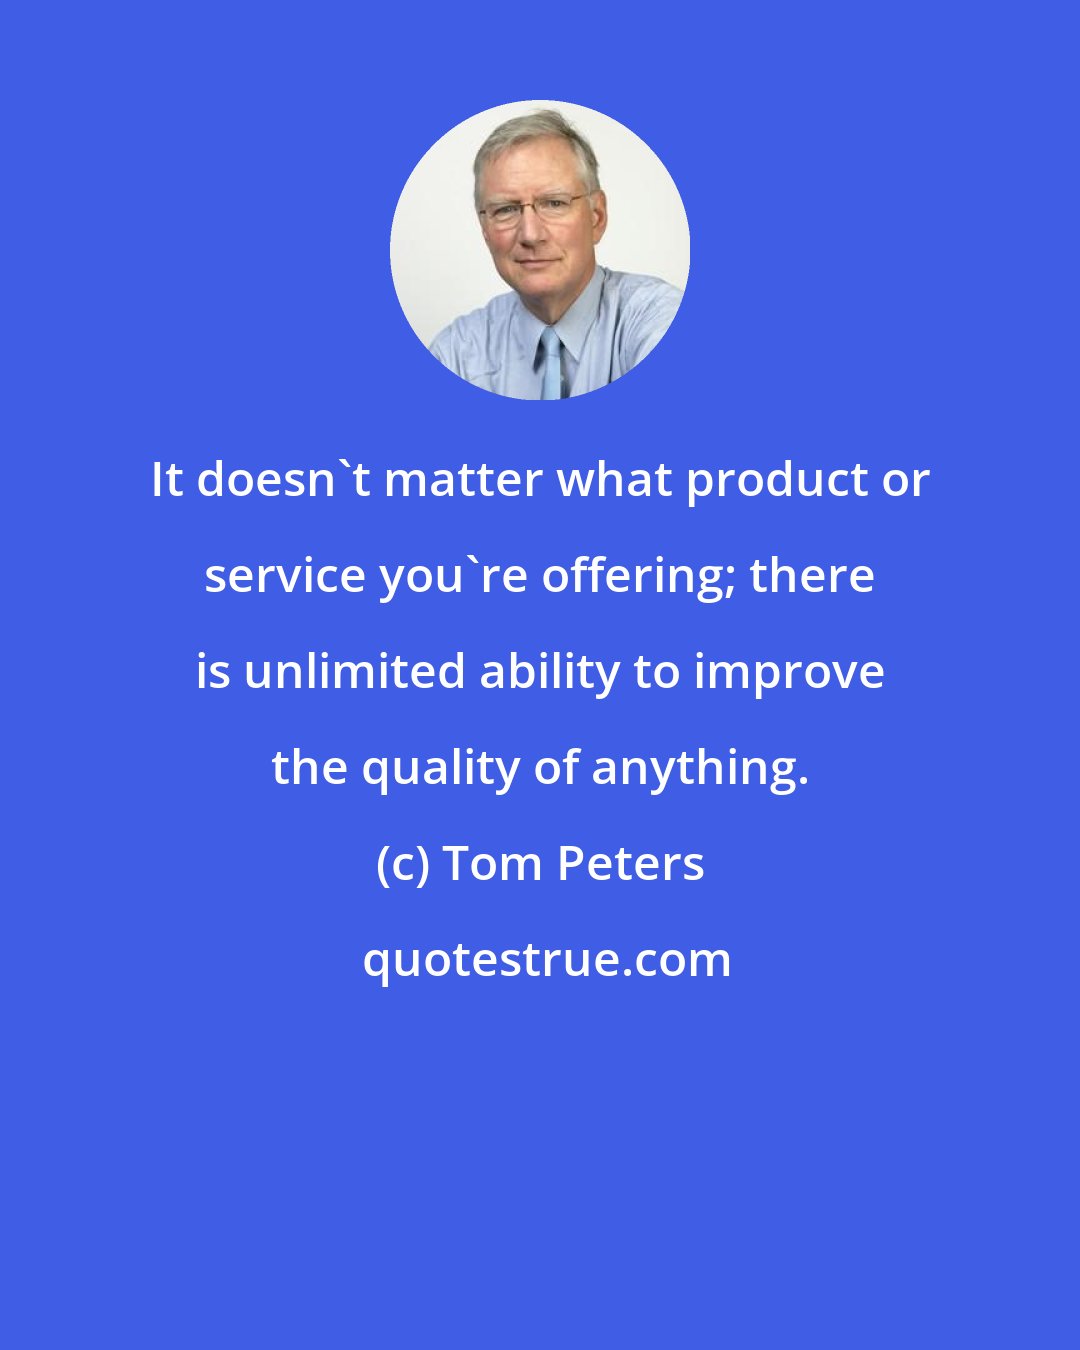 Tom Peters: It doesn't matter what product or service you're offering; there is unlimited ability to improve the quality of anything.